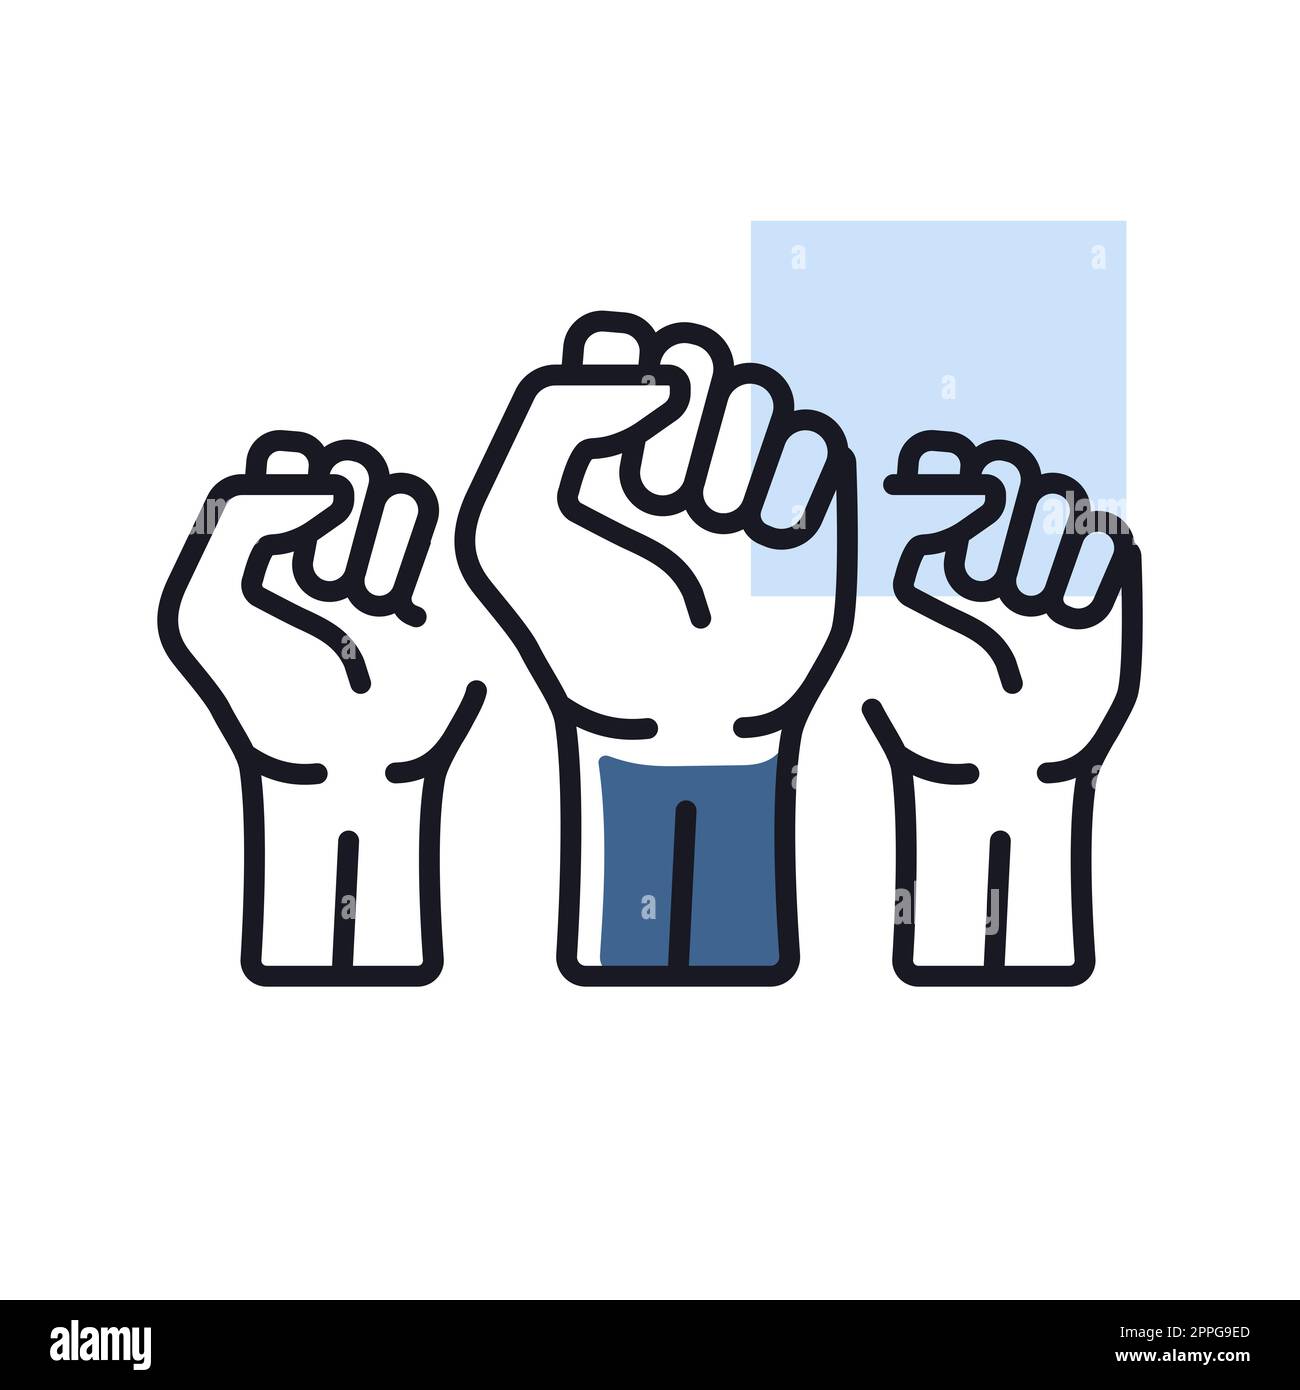 Three clenched fists raised in protest vector icon Stock Photo